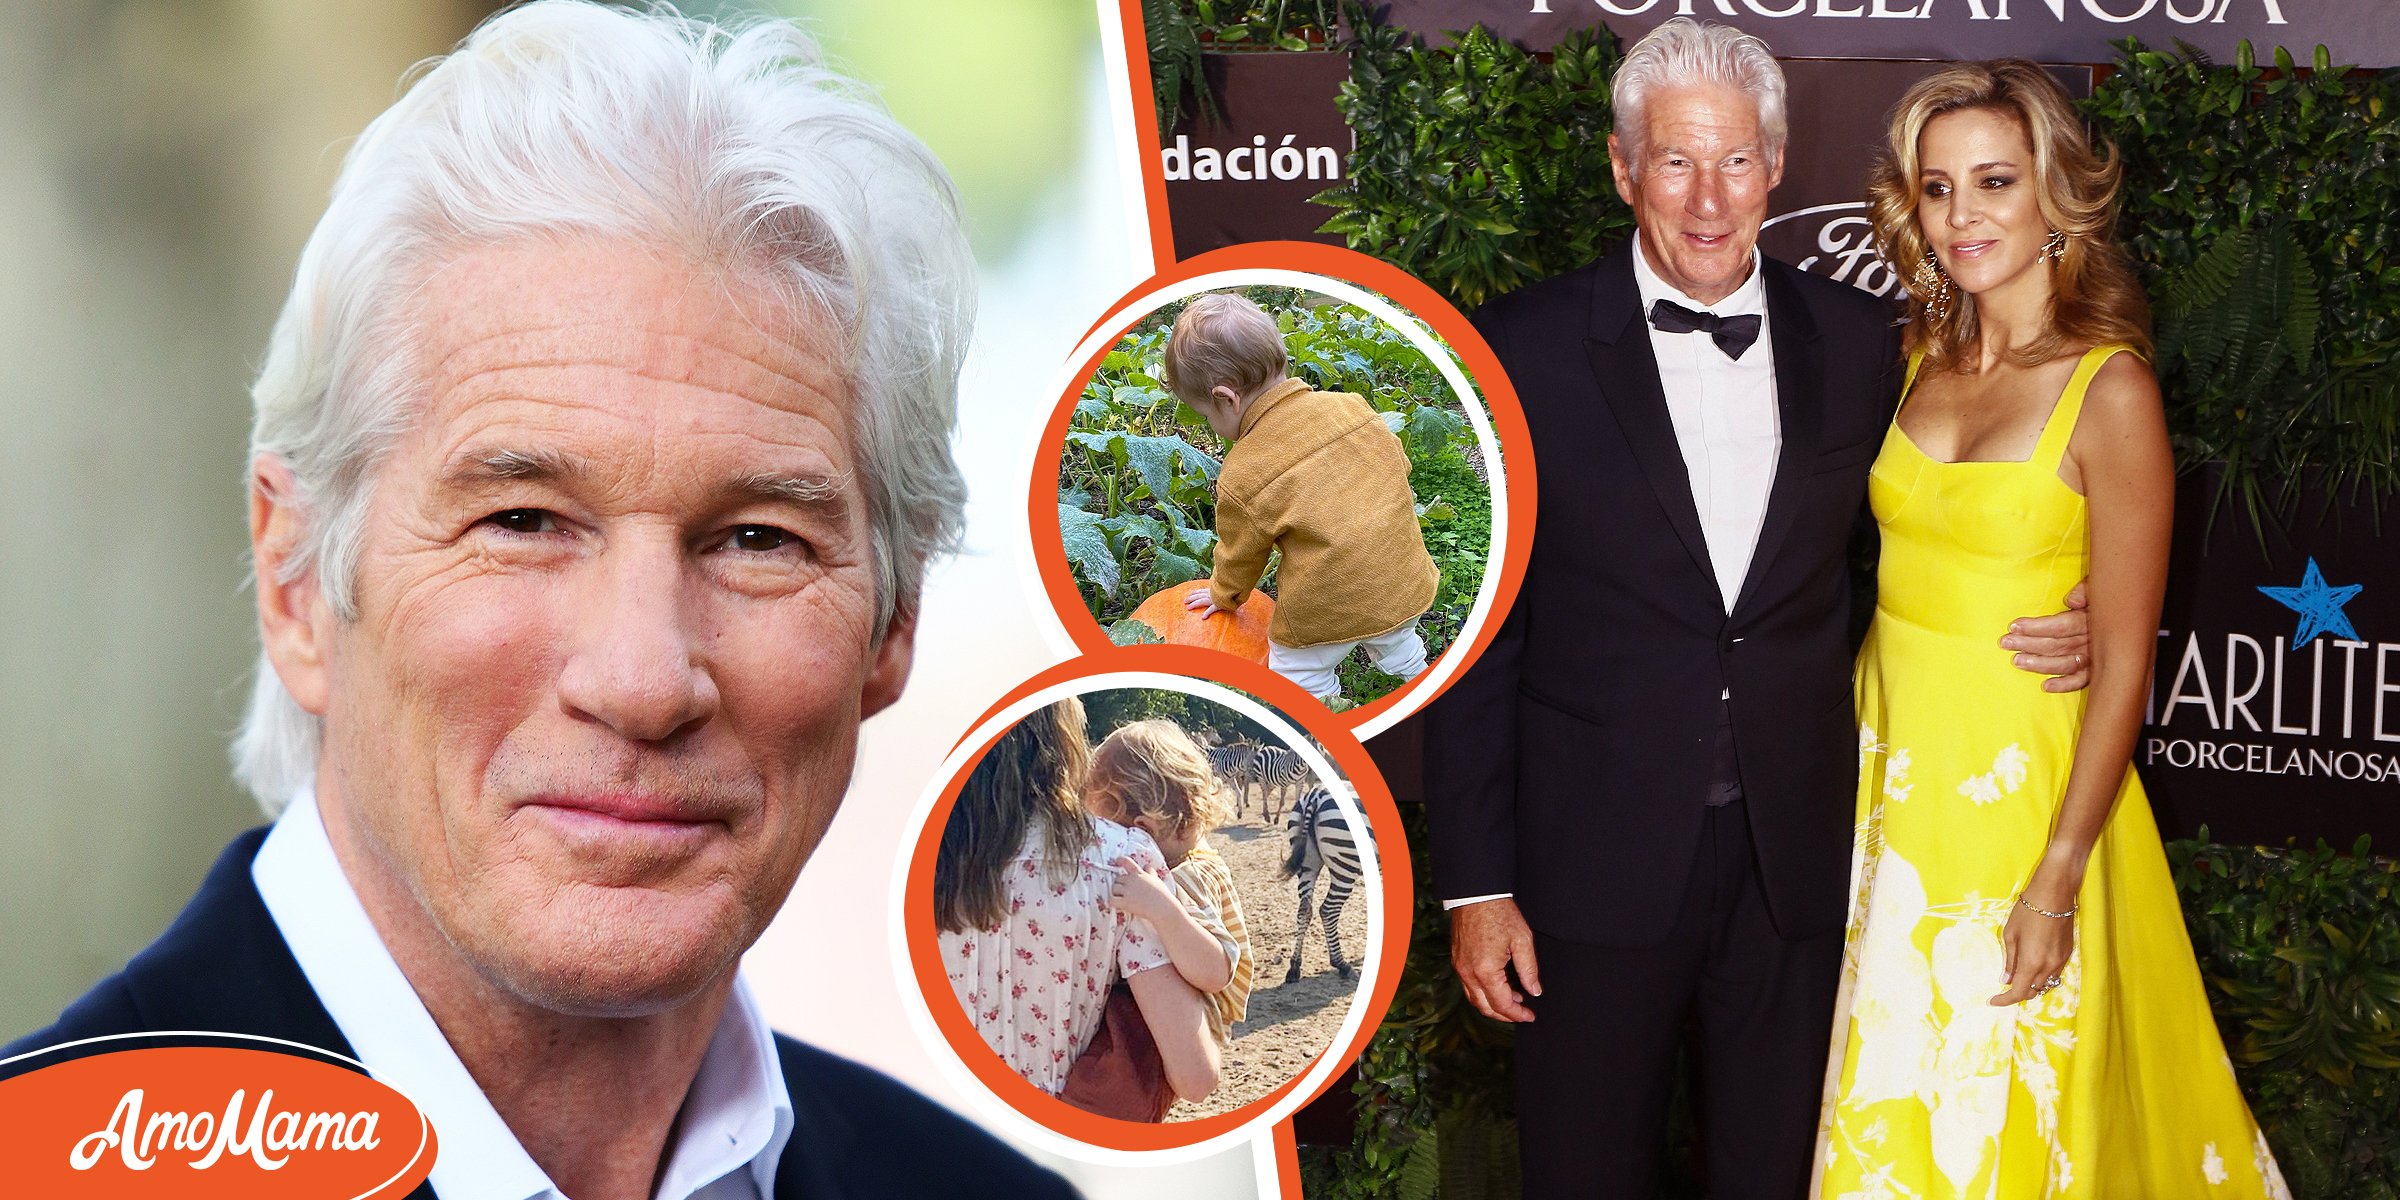 Richard Gere Has No Concerns about Being an Old Dad — His Goal Is to ‘Become Happier’ to Chagrin of Neighbors